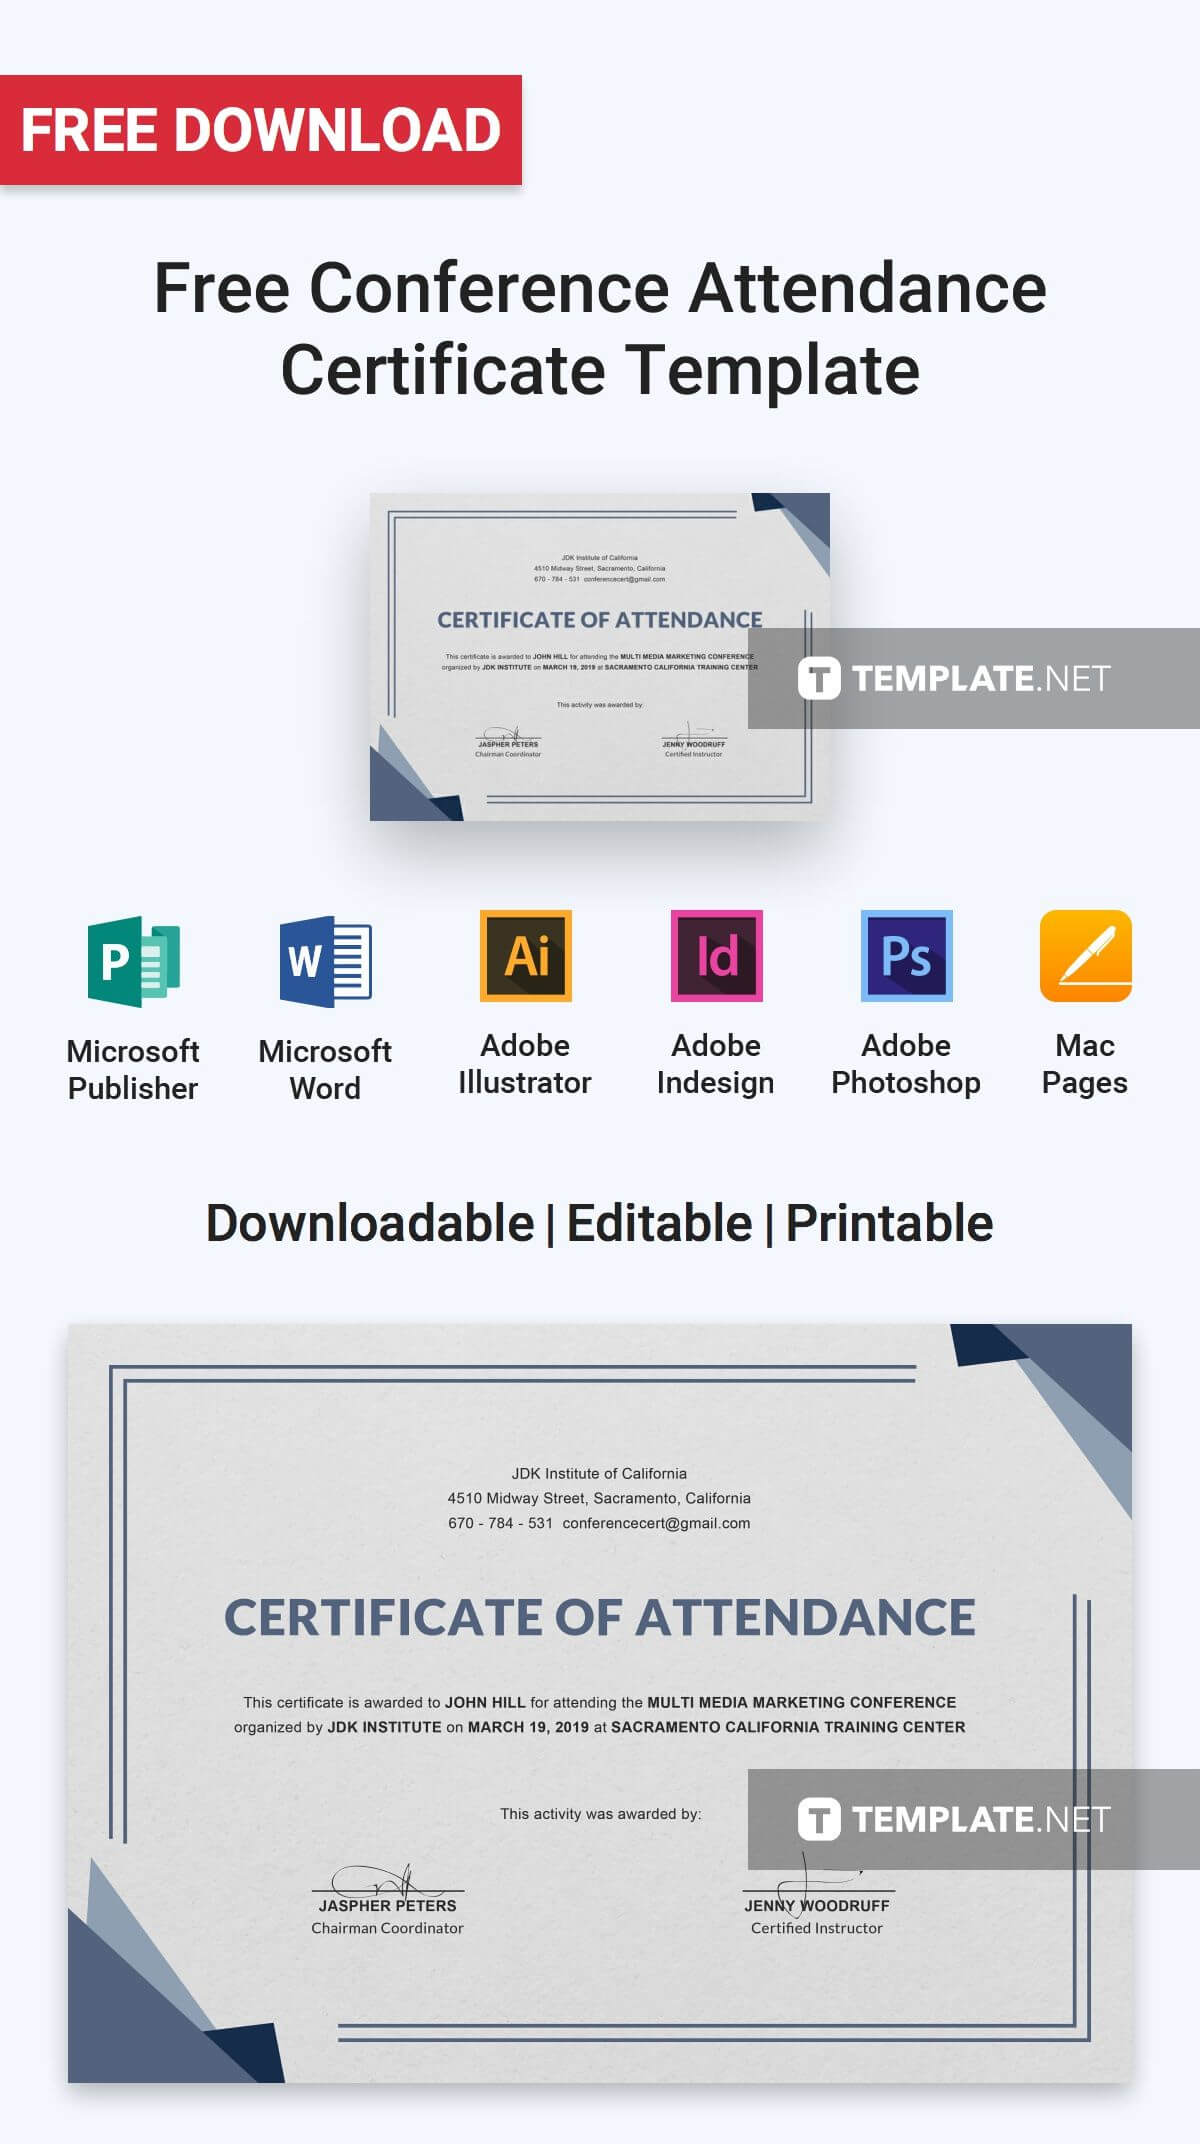 Free Conference Attendance Certificate | Attendance Throughout Conference Certificate Of Attendance Template